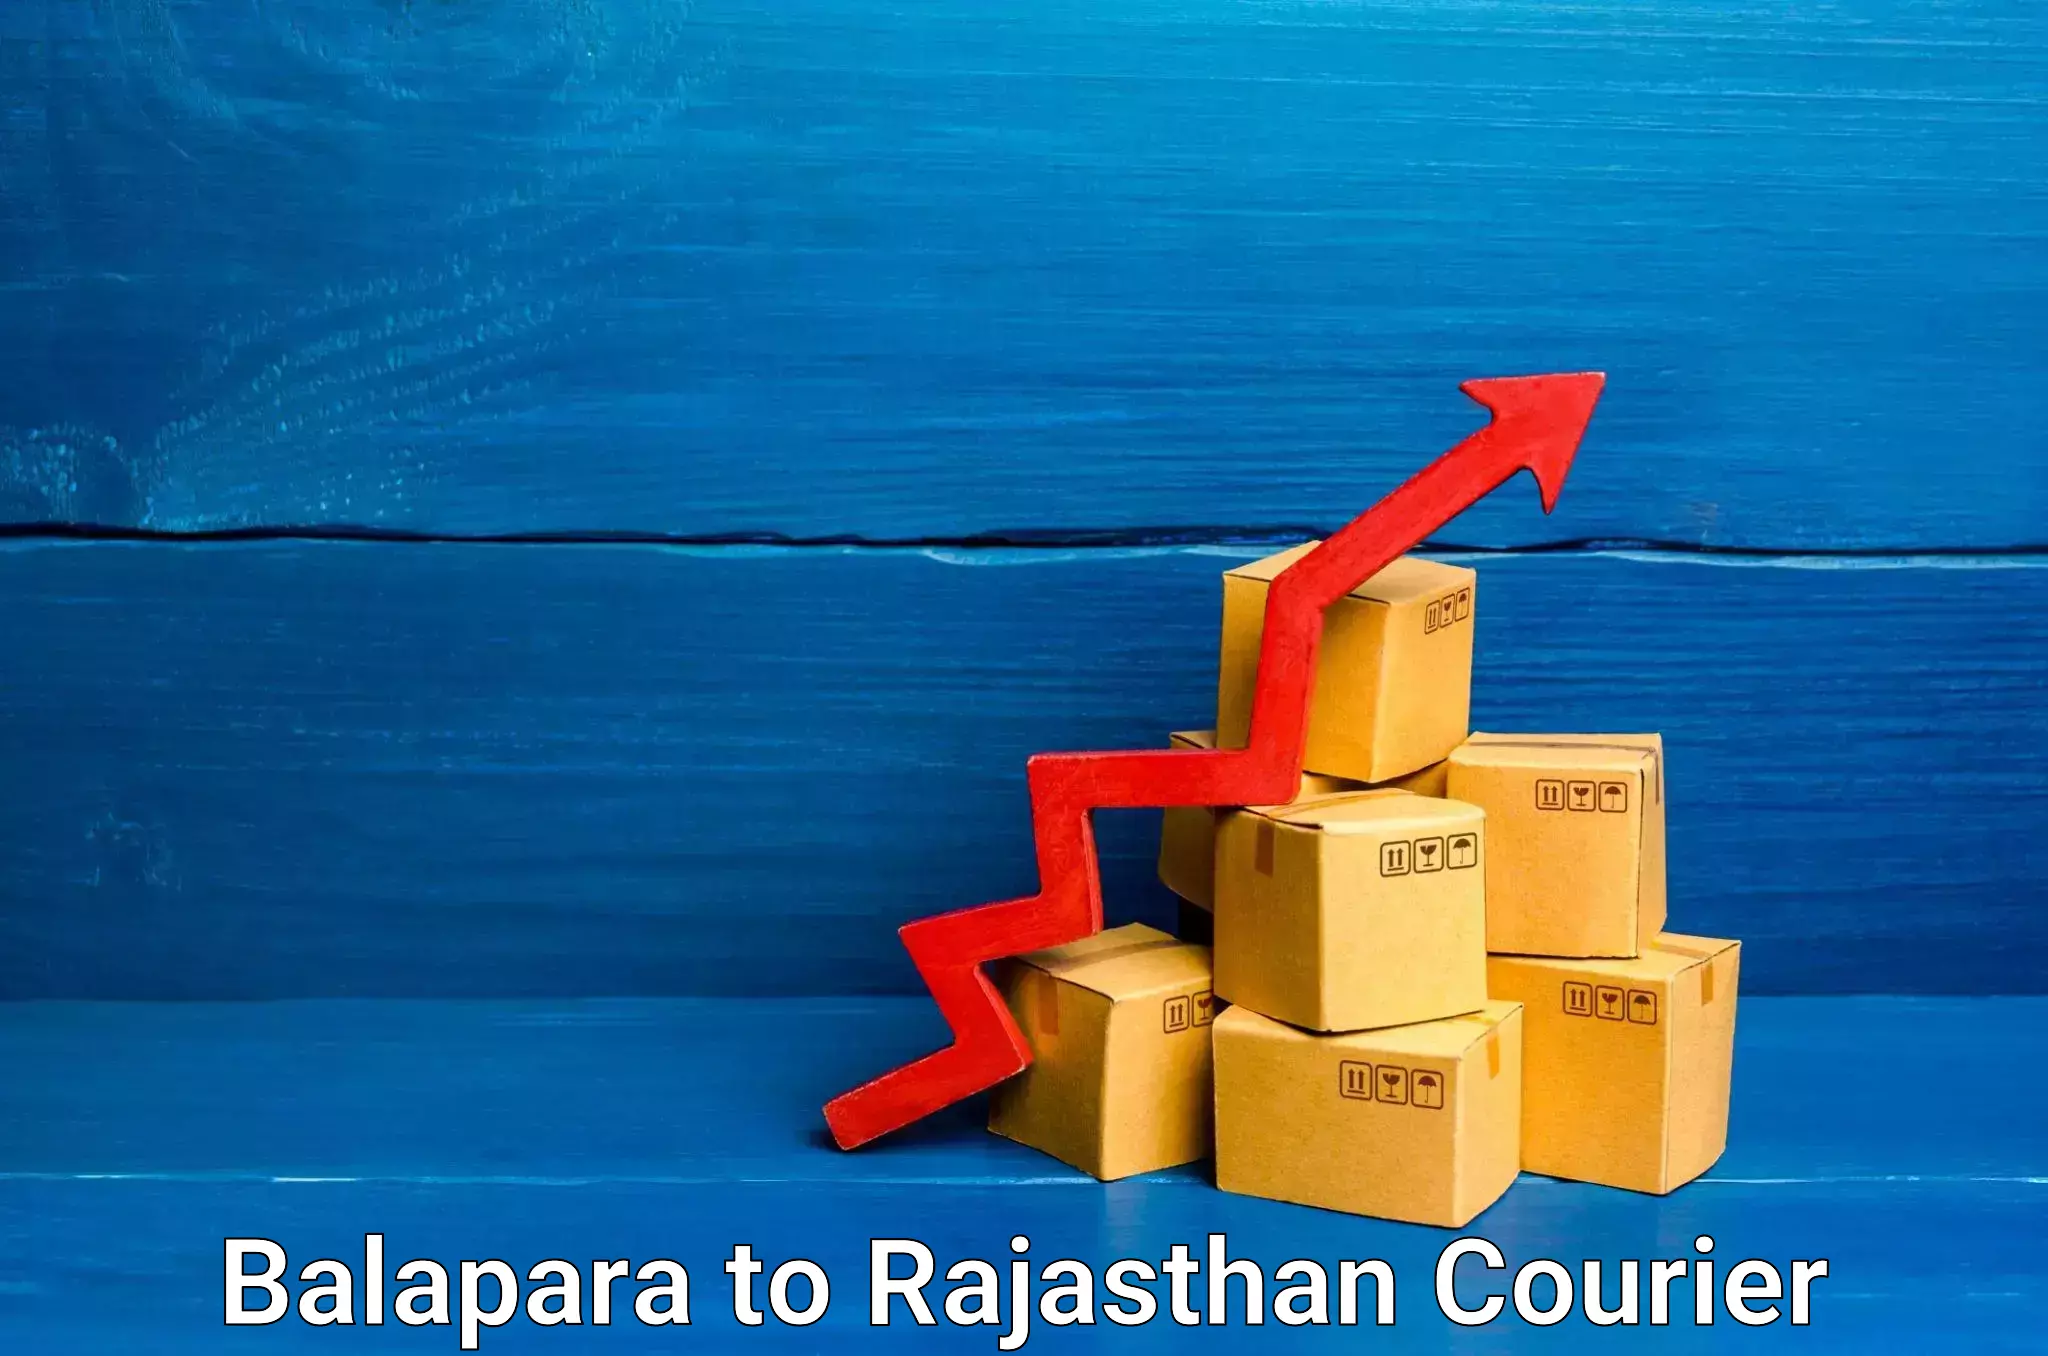 Express delivery network Balapara to Rajasthan